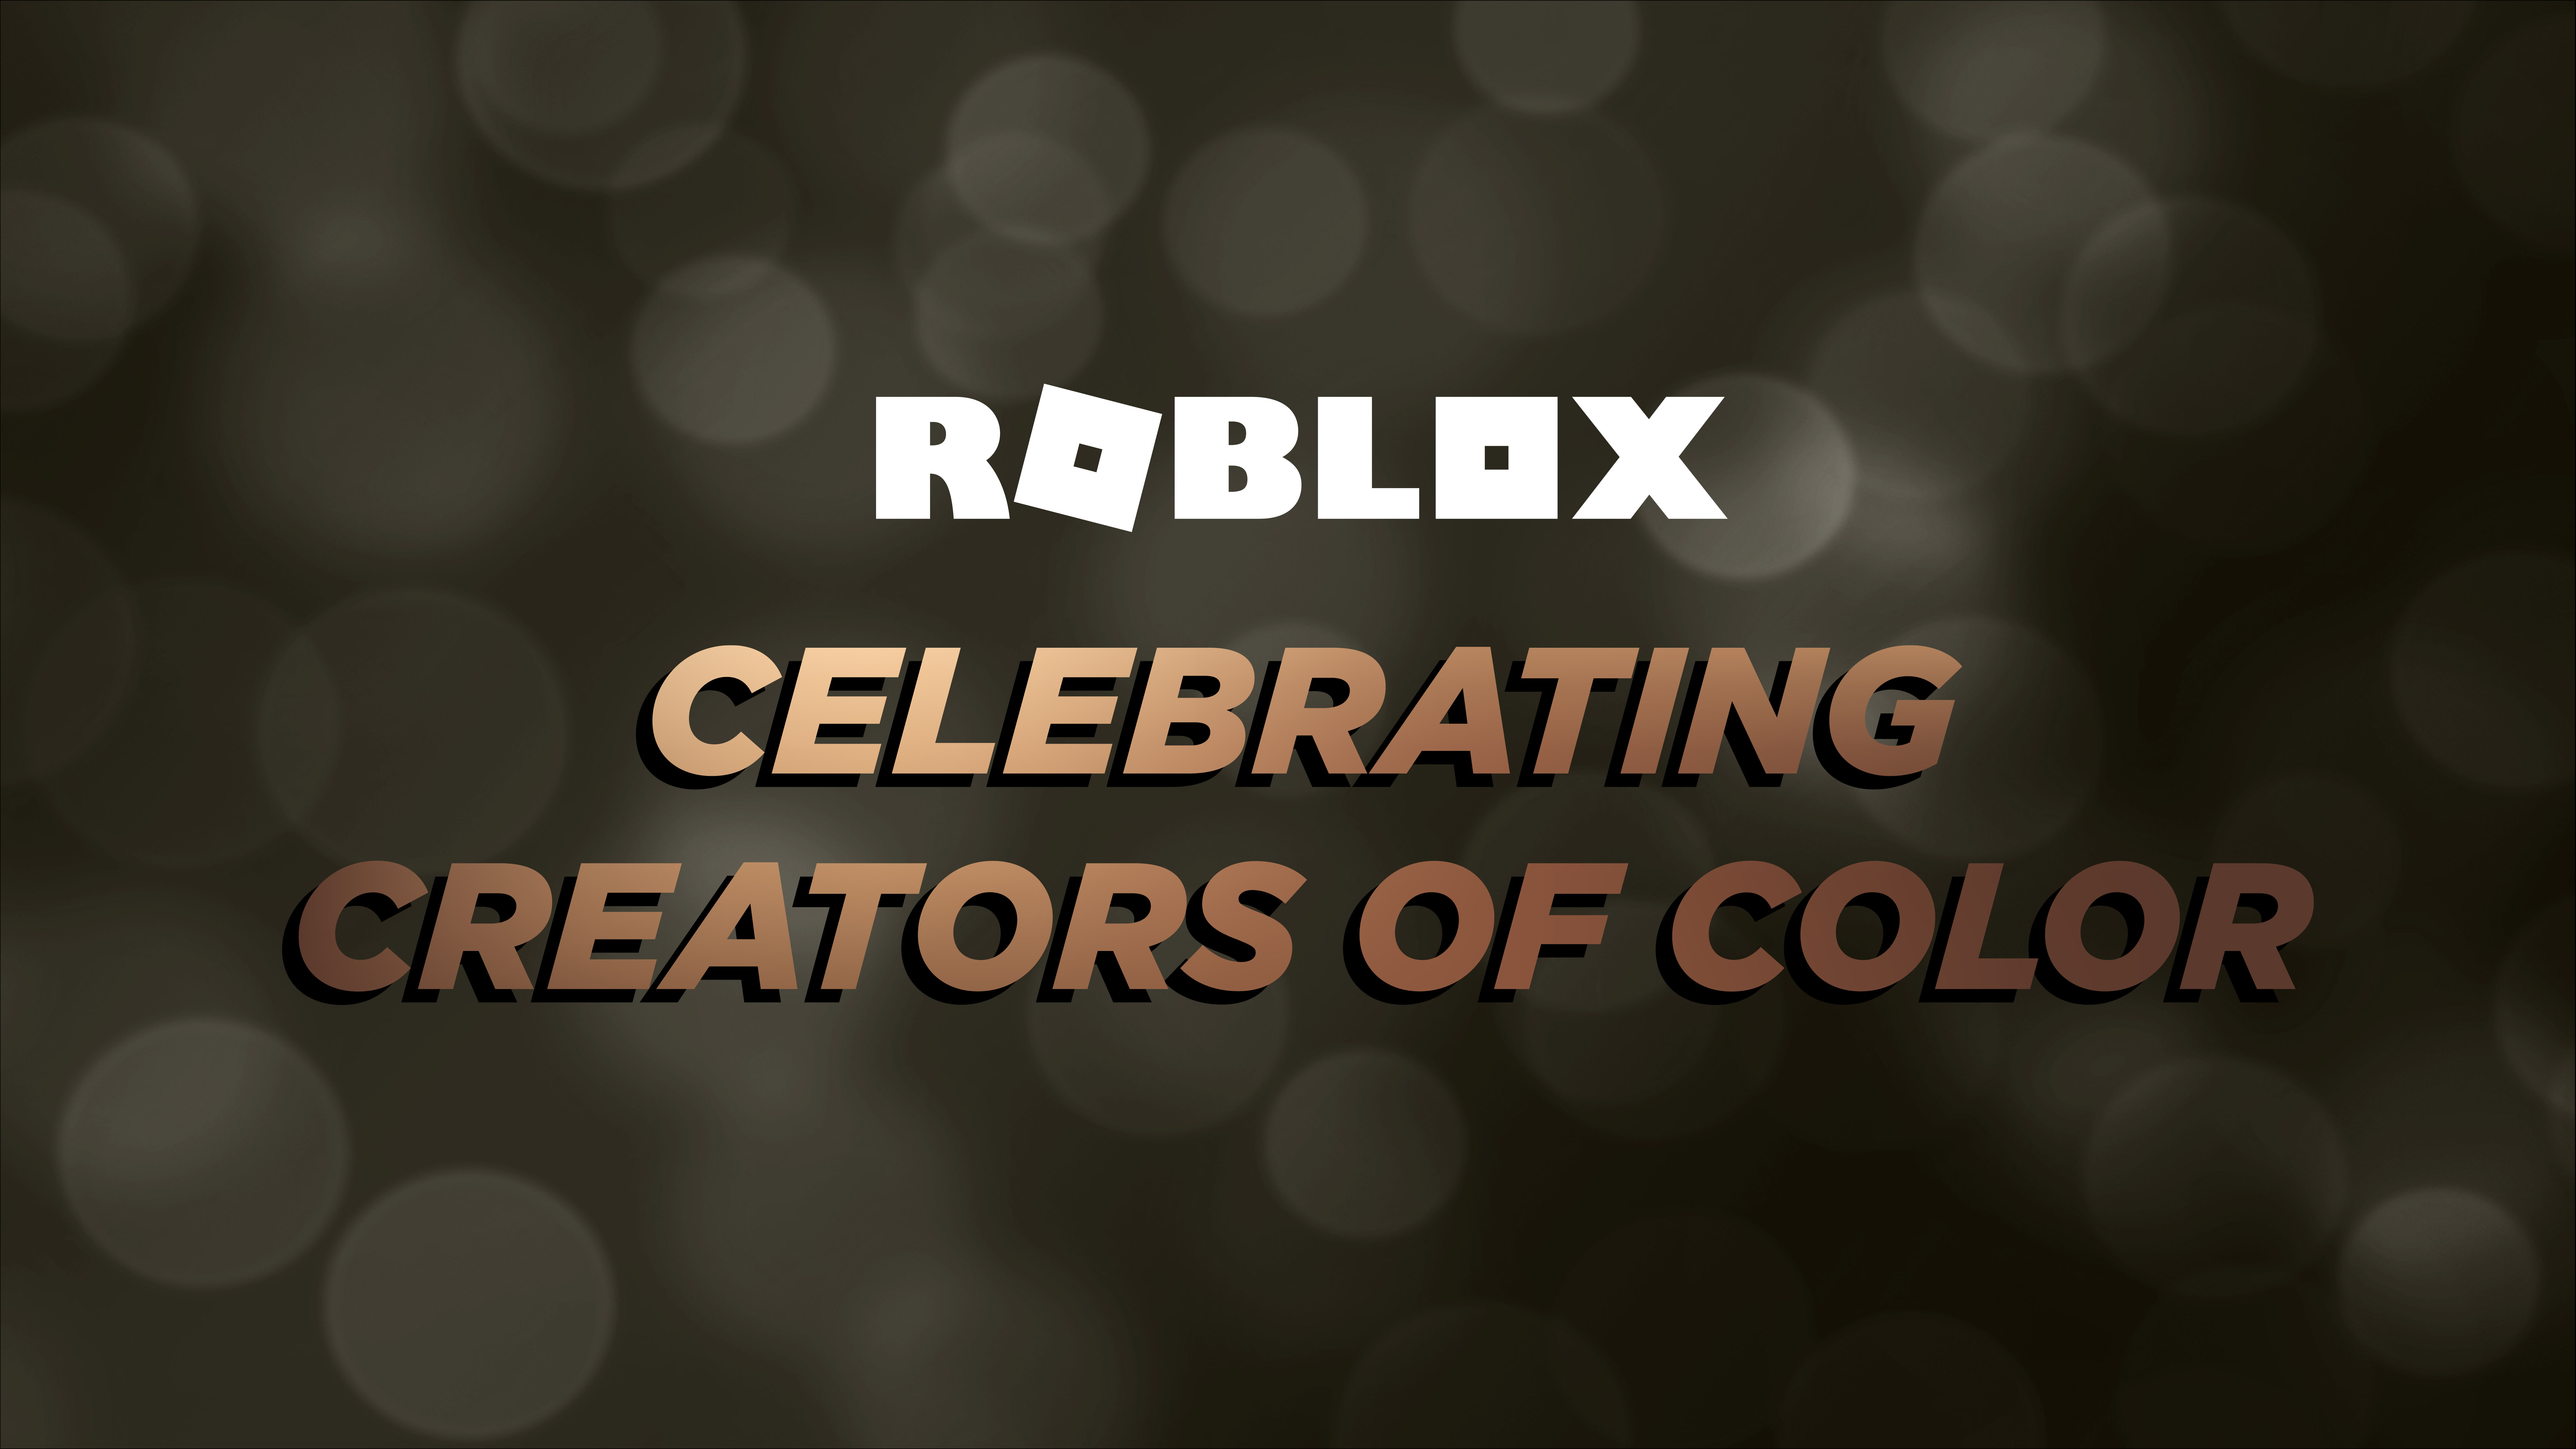 Roblox Blog All The Latest News Direct From Roblox Employees - roblox event 2021 october